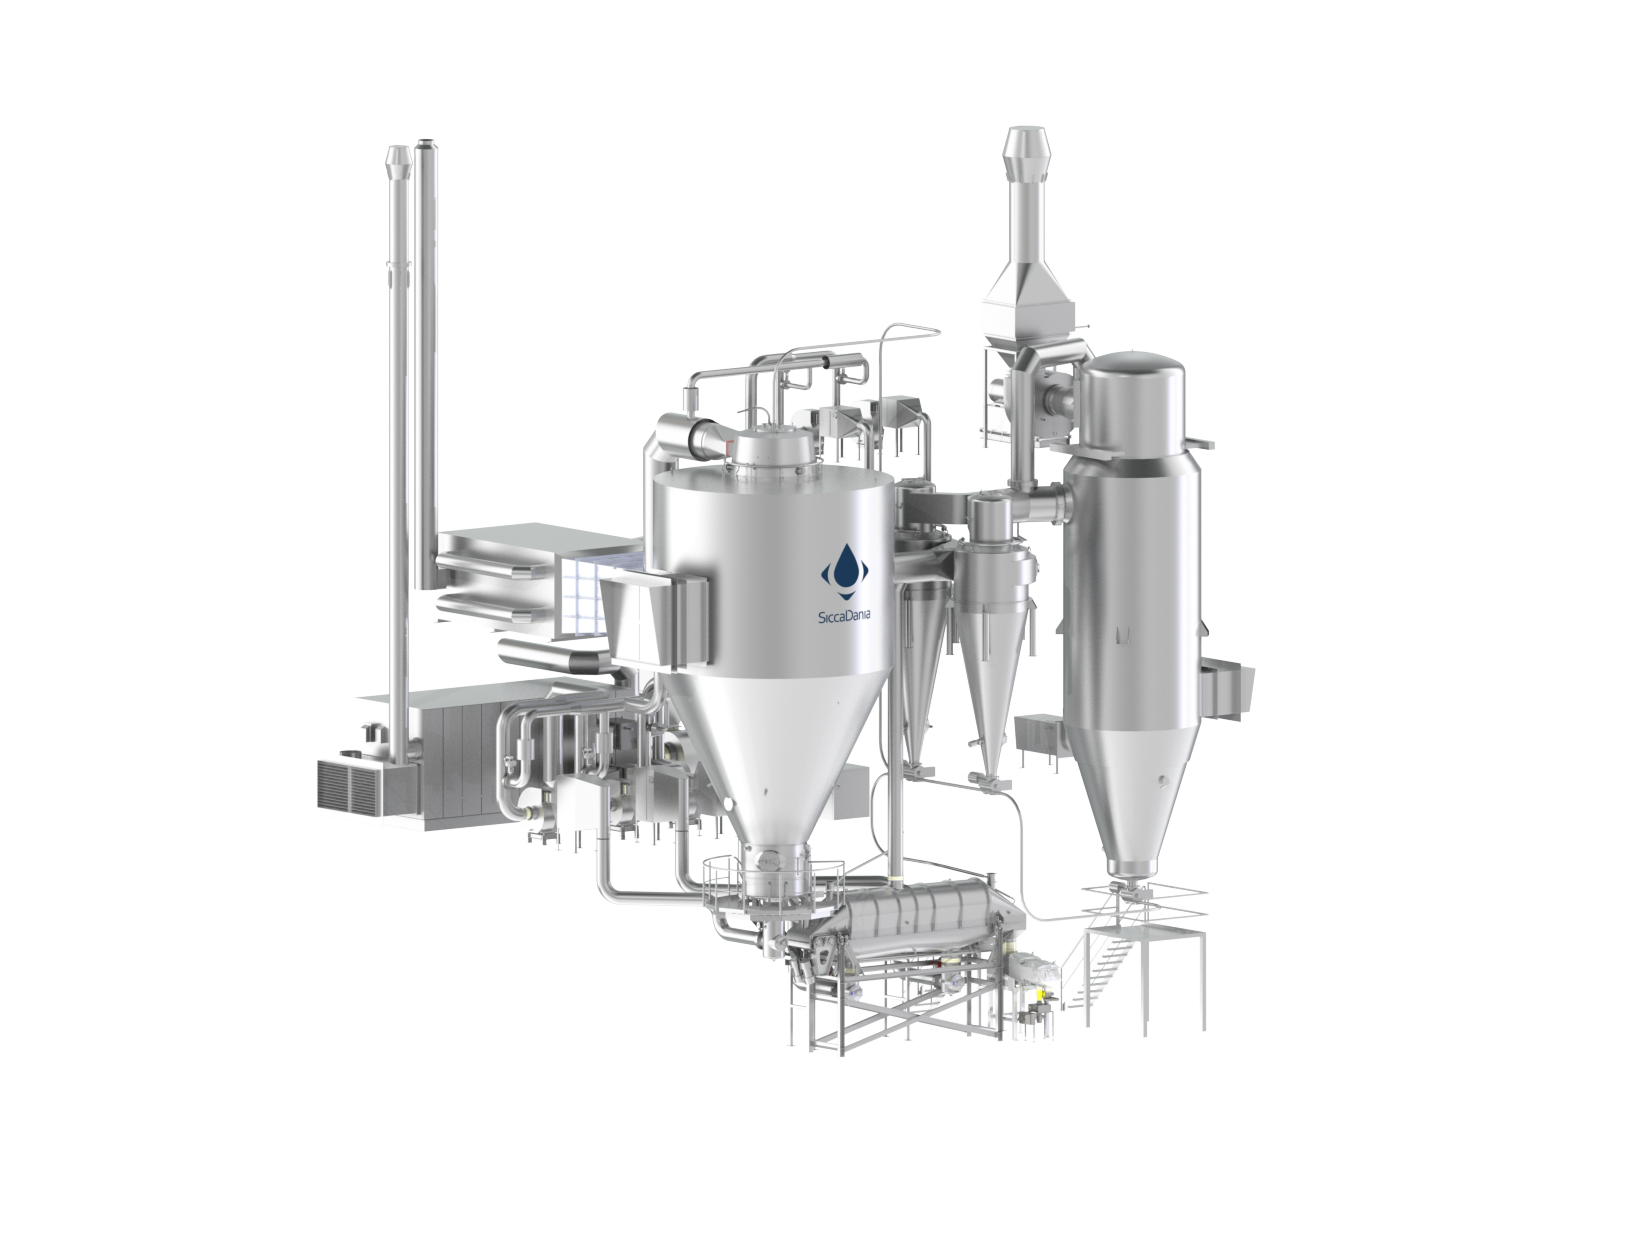 Spray drying plant with bag filter and cyclones